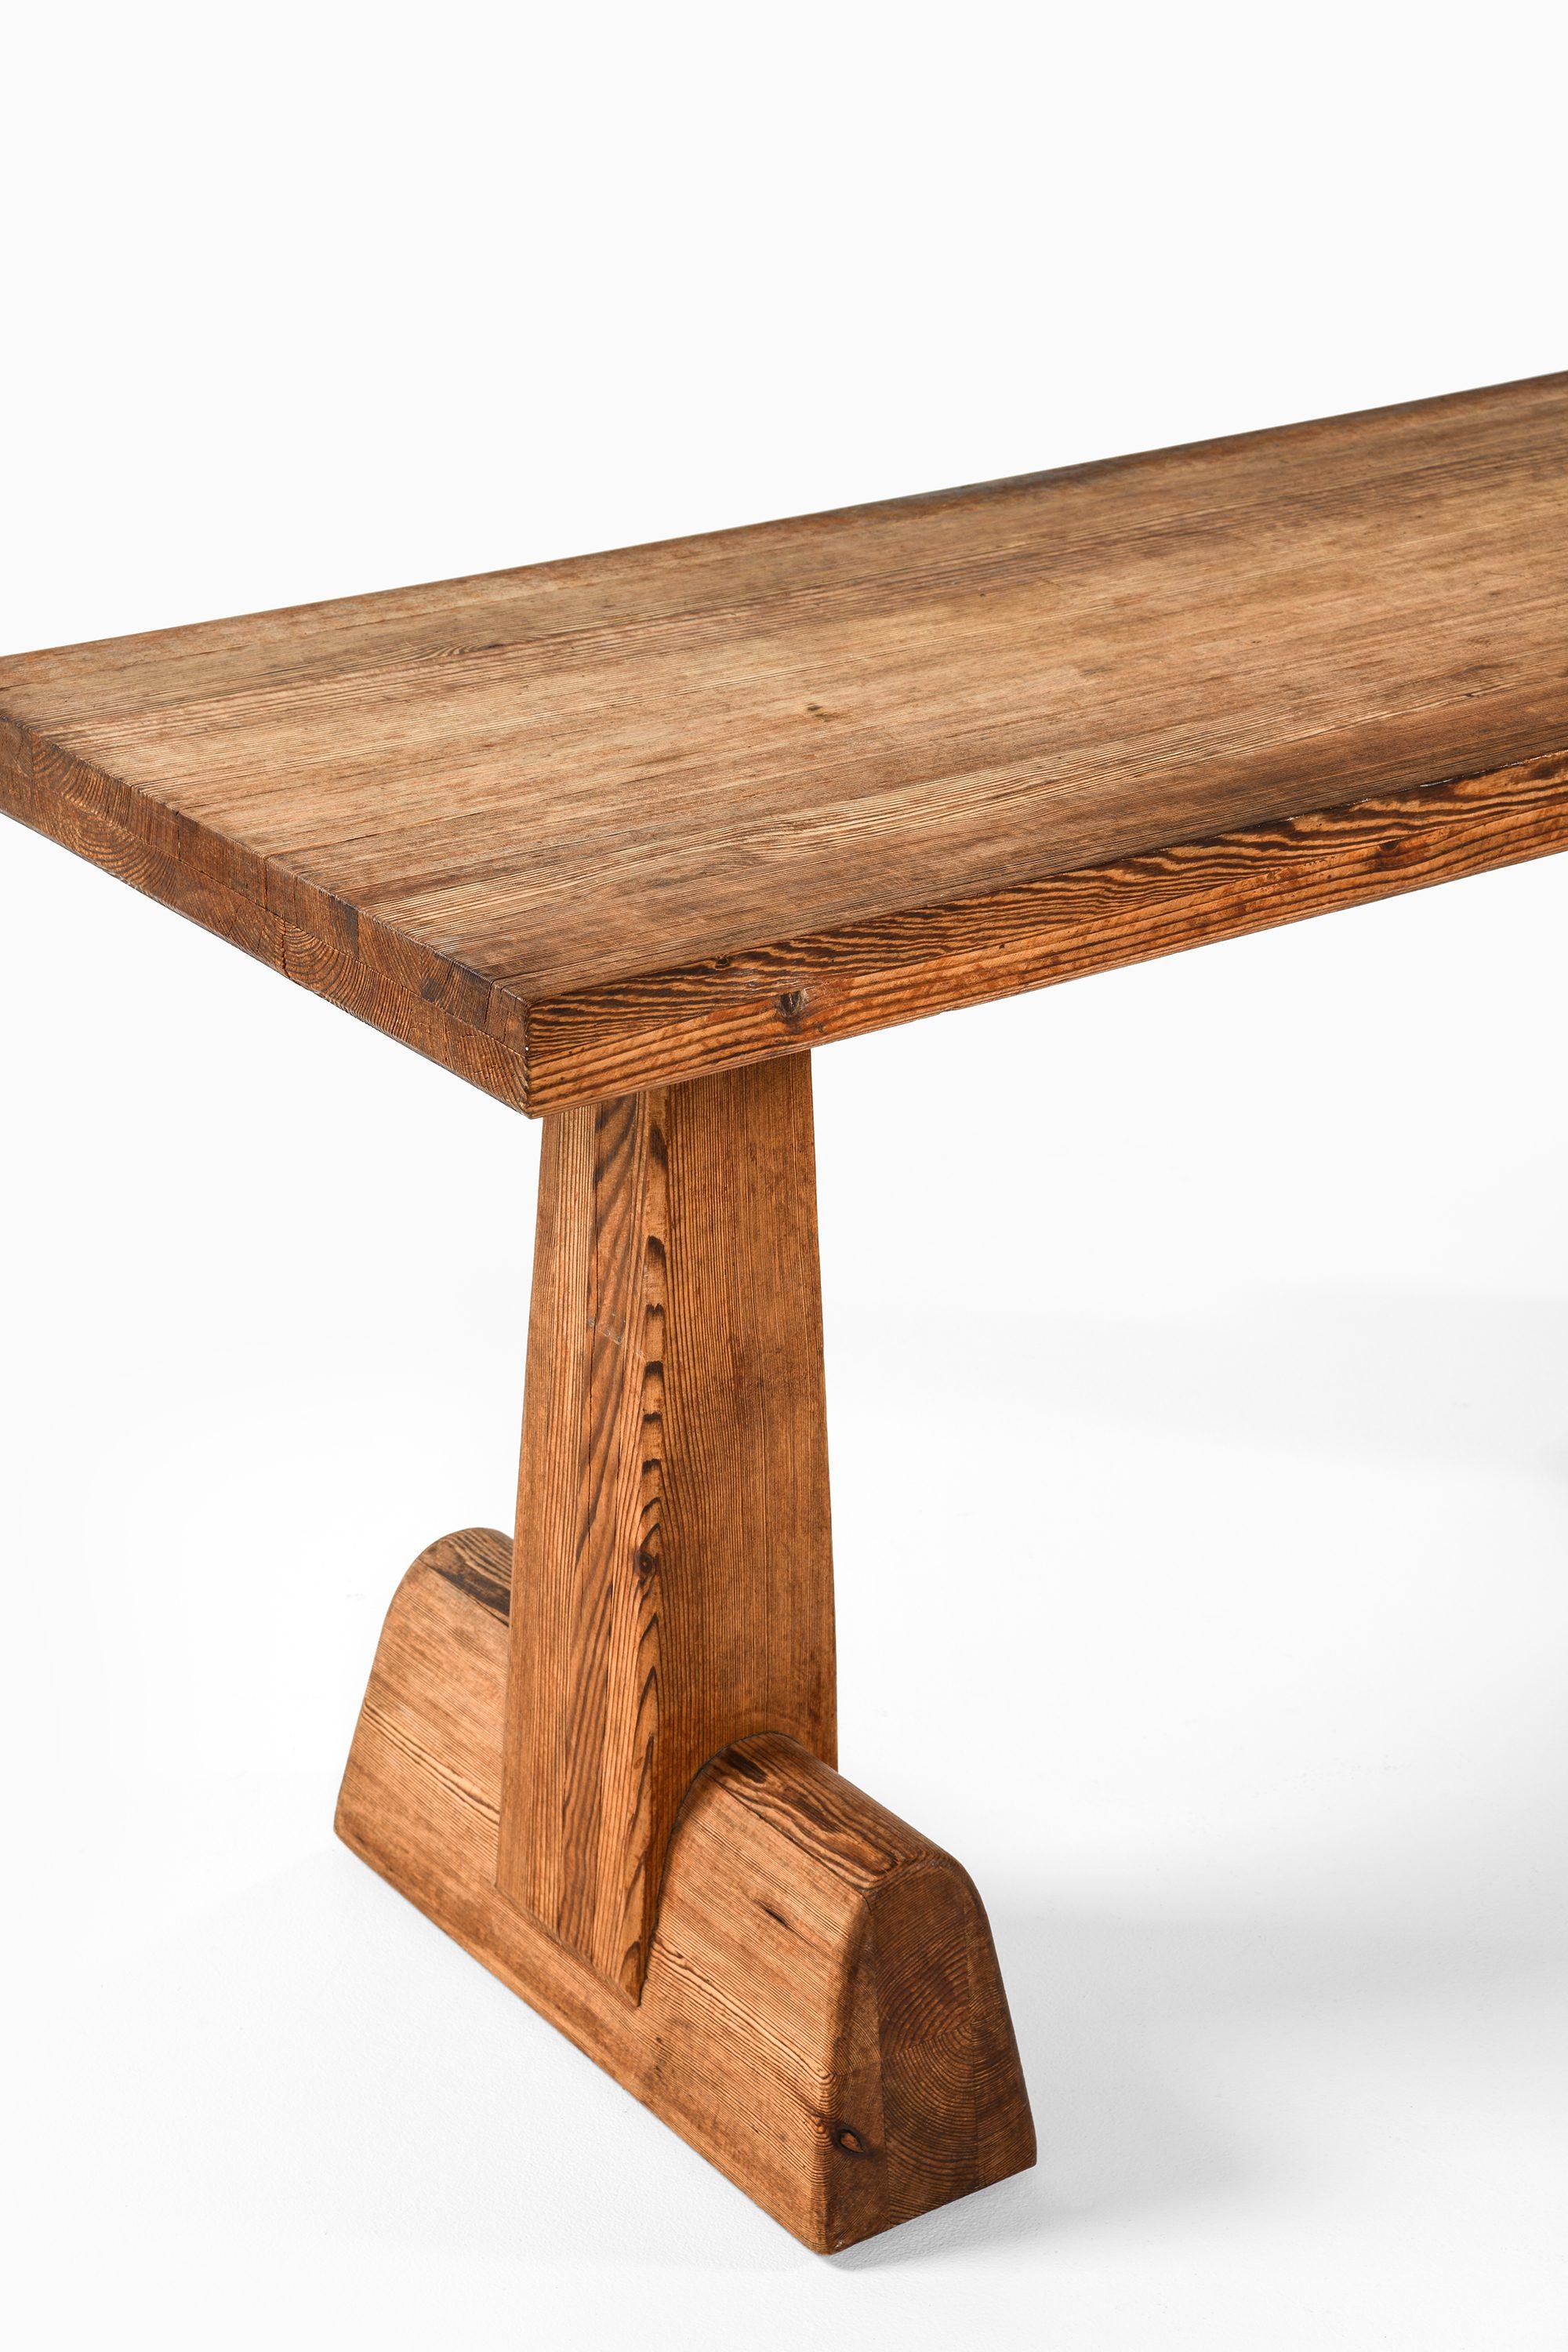 20th Century Library / Console Table in Acid-Stained Pine by Axel Einar Hjorth, 1932 For Sale